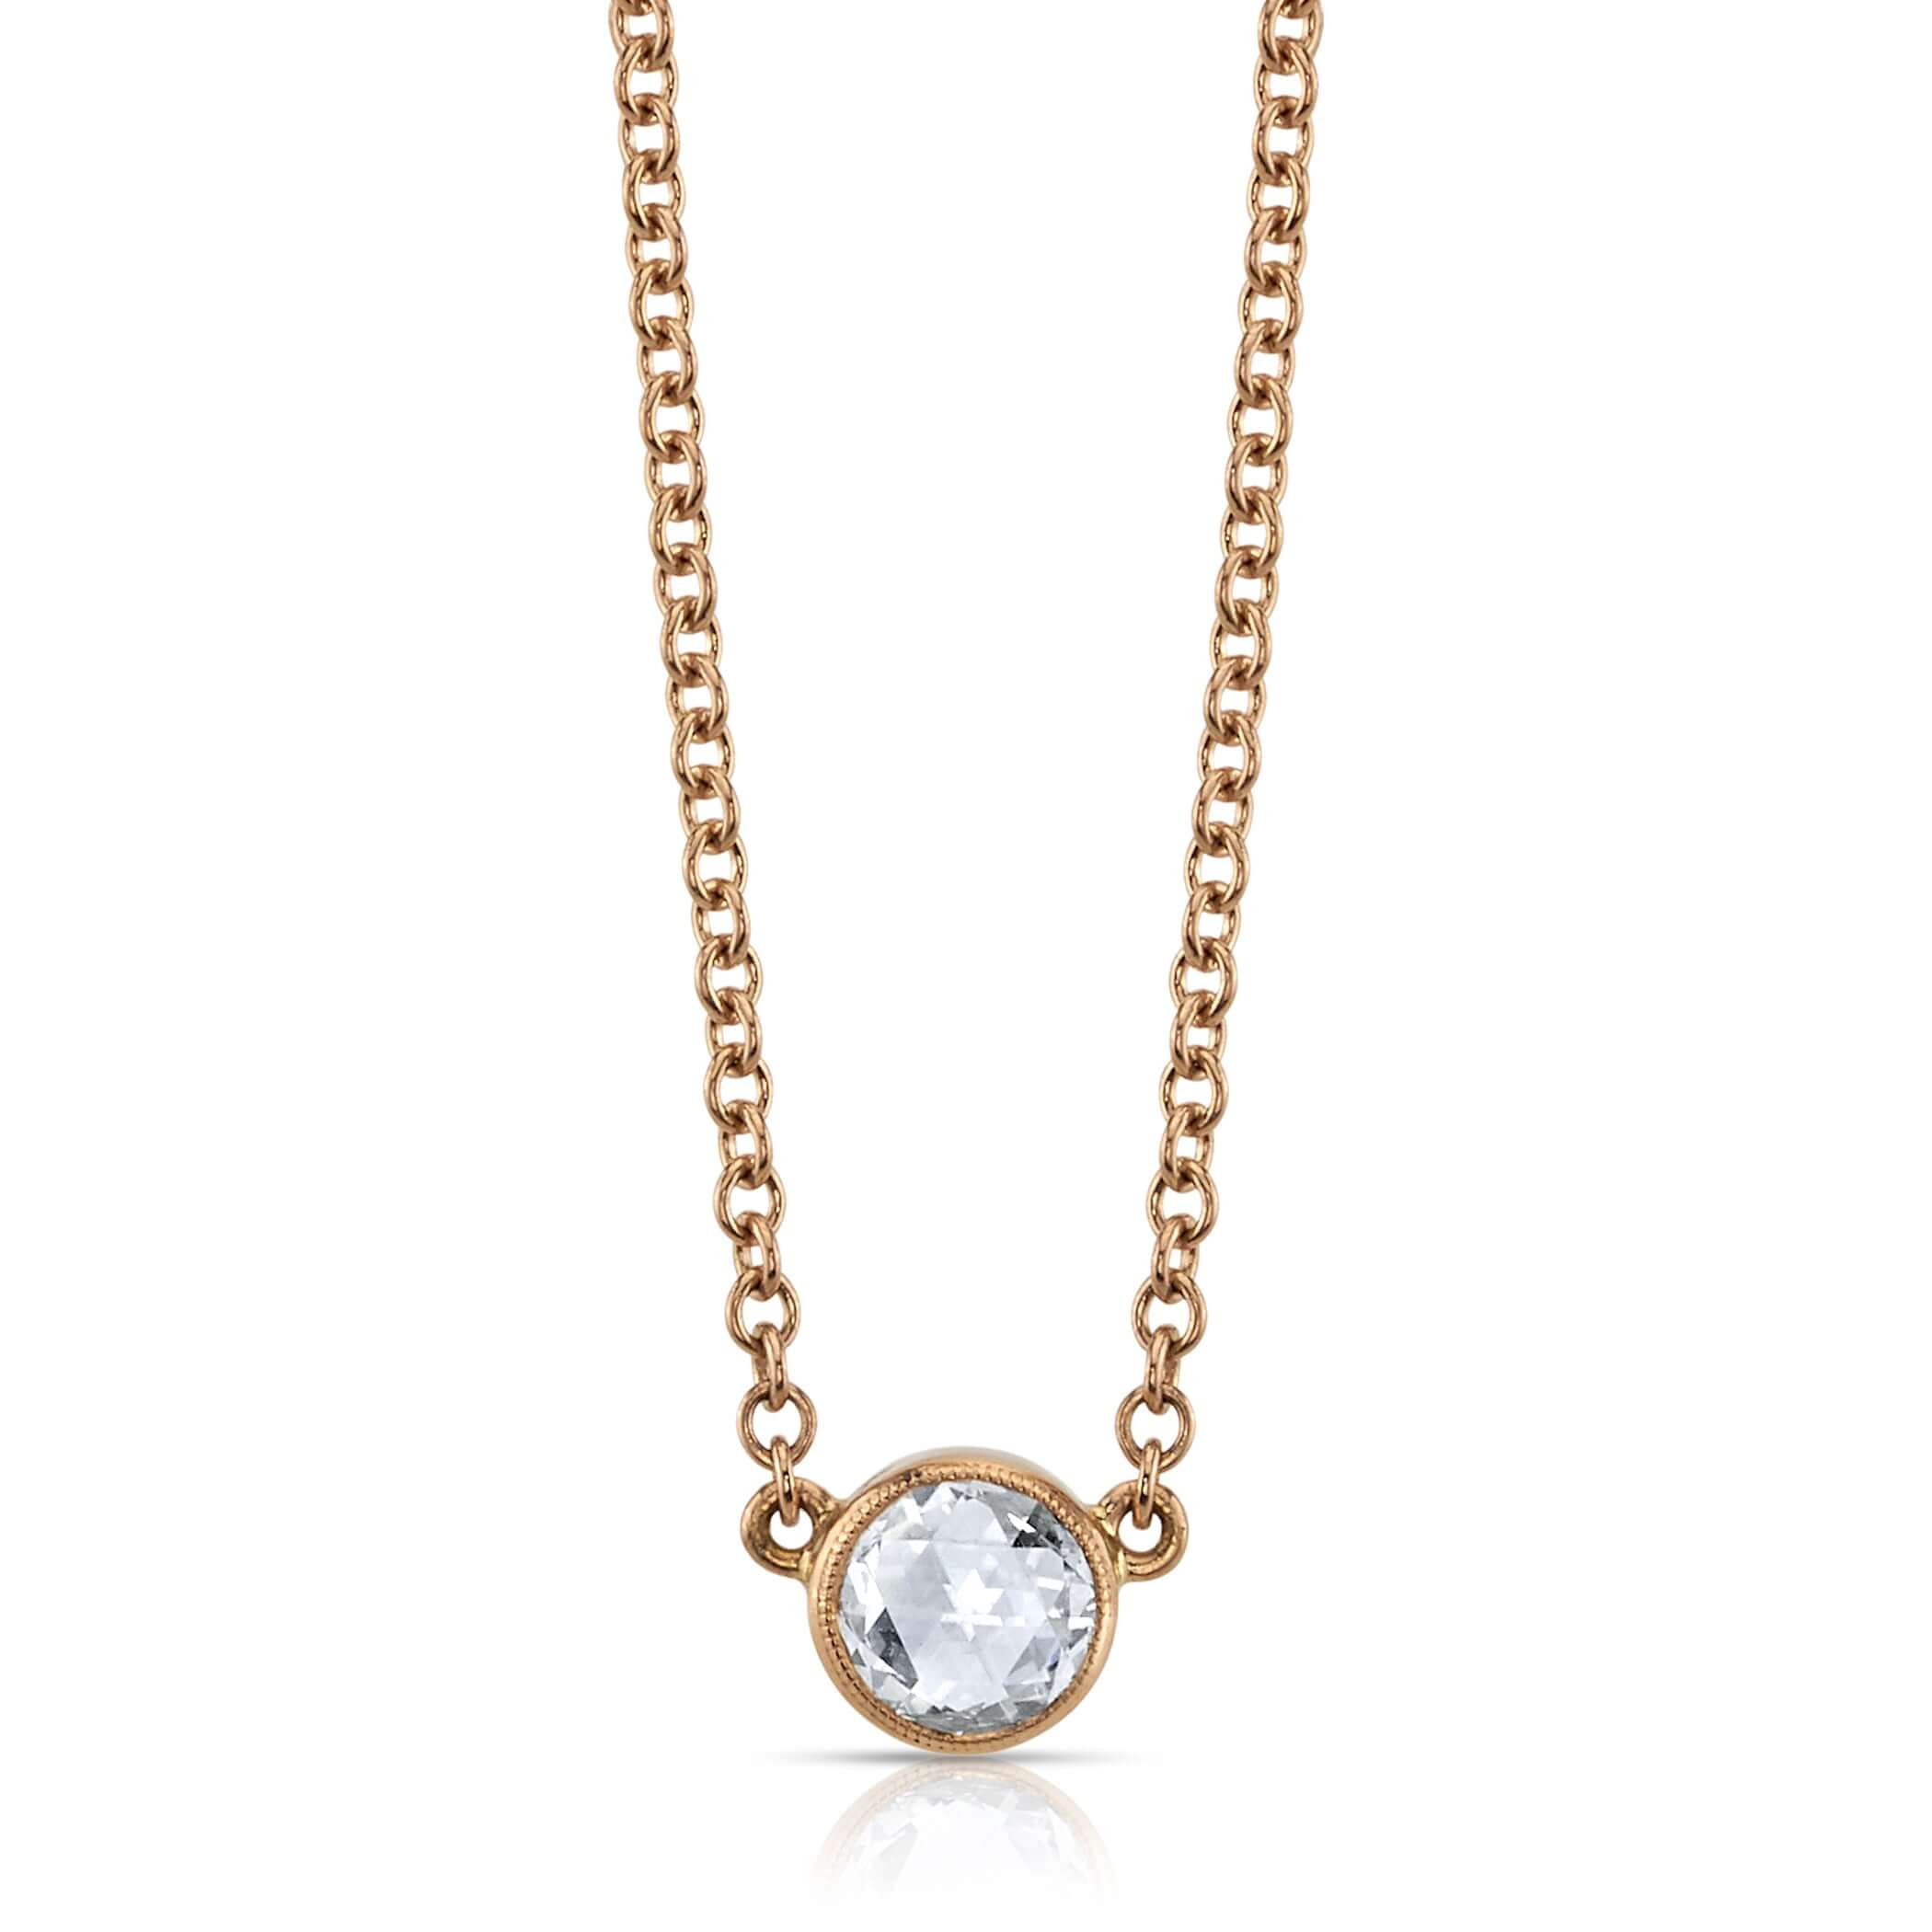 SINGLE STONE LINCOLN NECKLACE featuring 0.44ctw J/VS rose cut diamond bezel set on a handcrafted 18K rose gold necklace. Necklace measures 17".